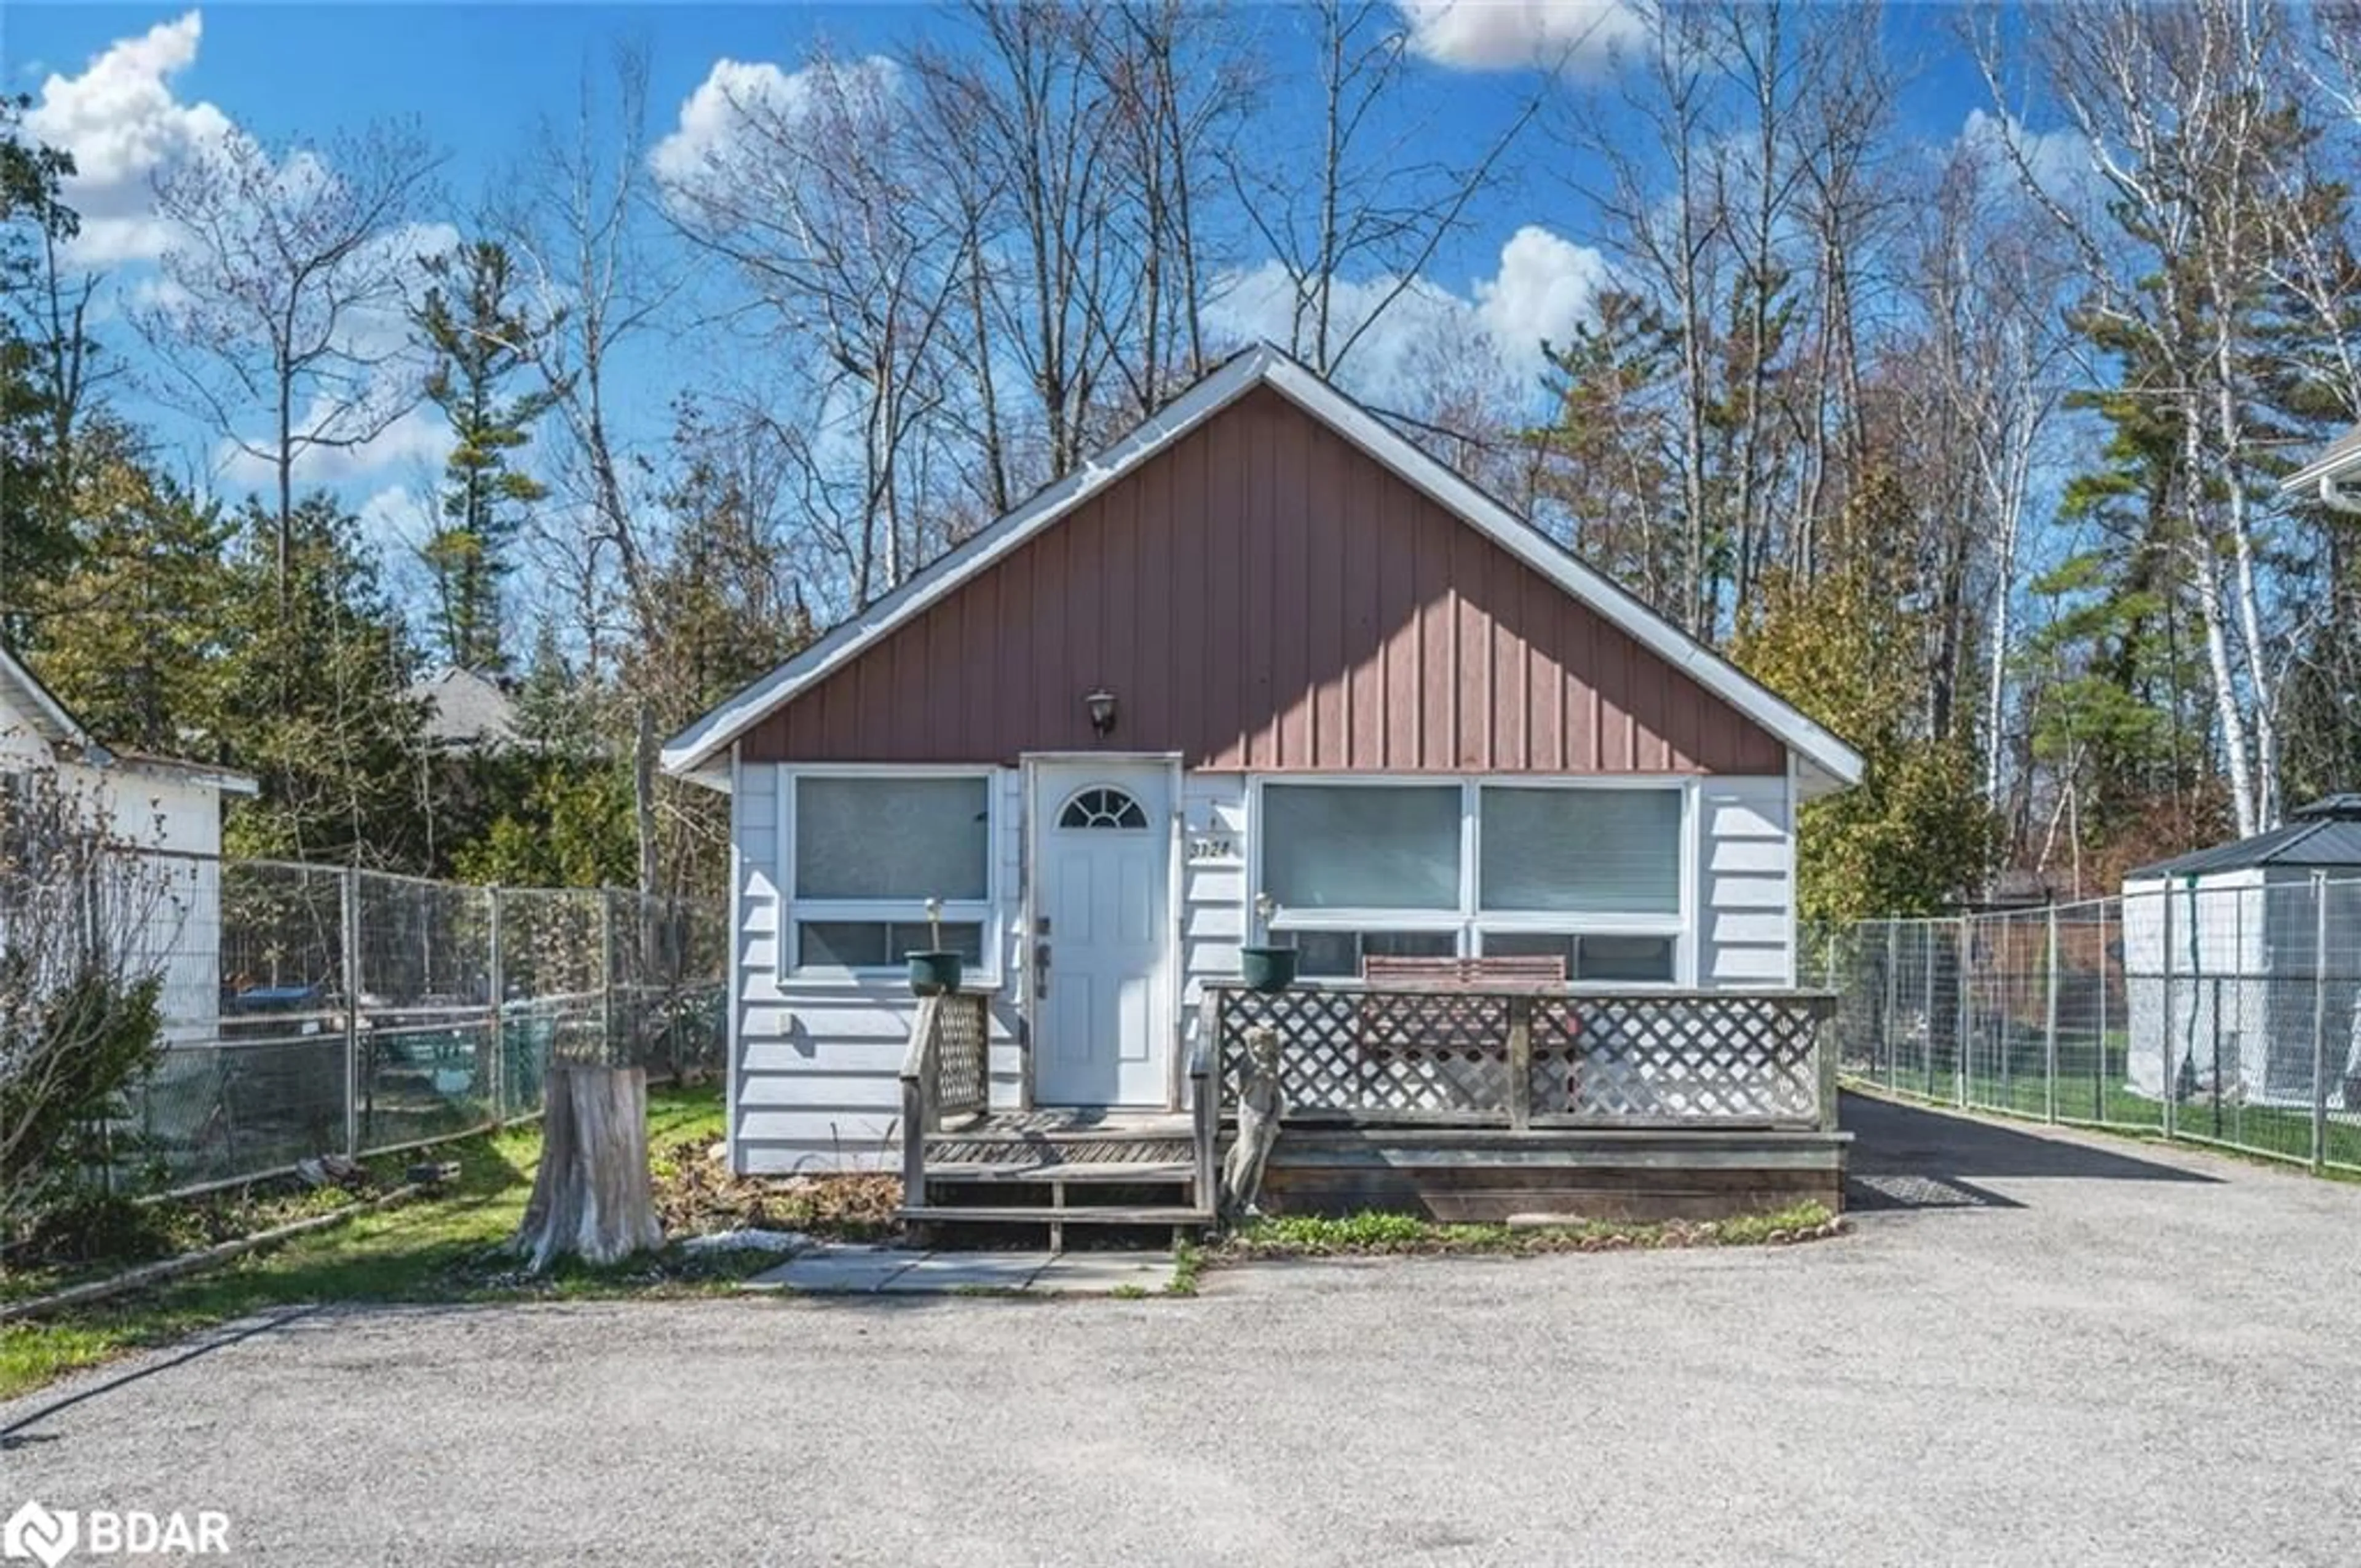 Cottage for 3124 Mosley St, Wasaga Beach Ontario L9Z 1V6